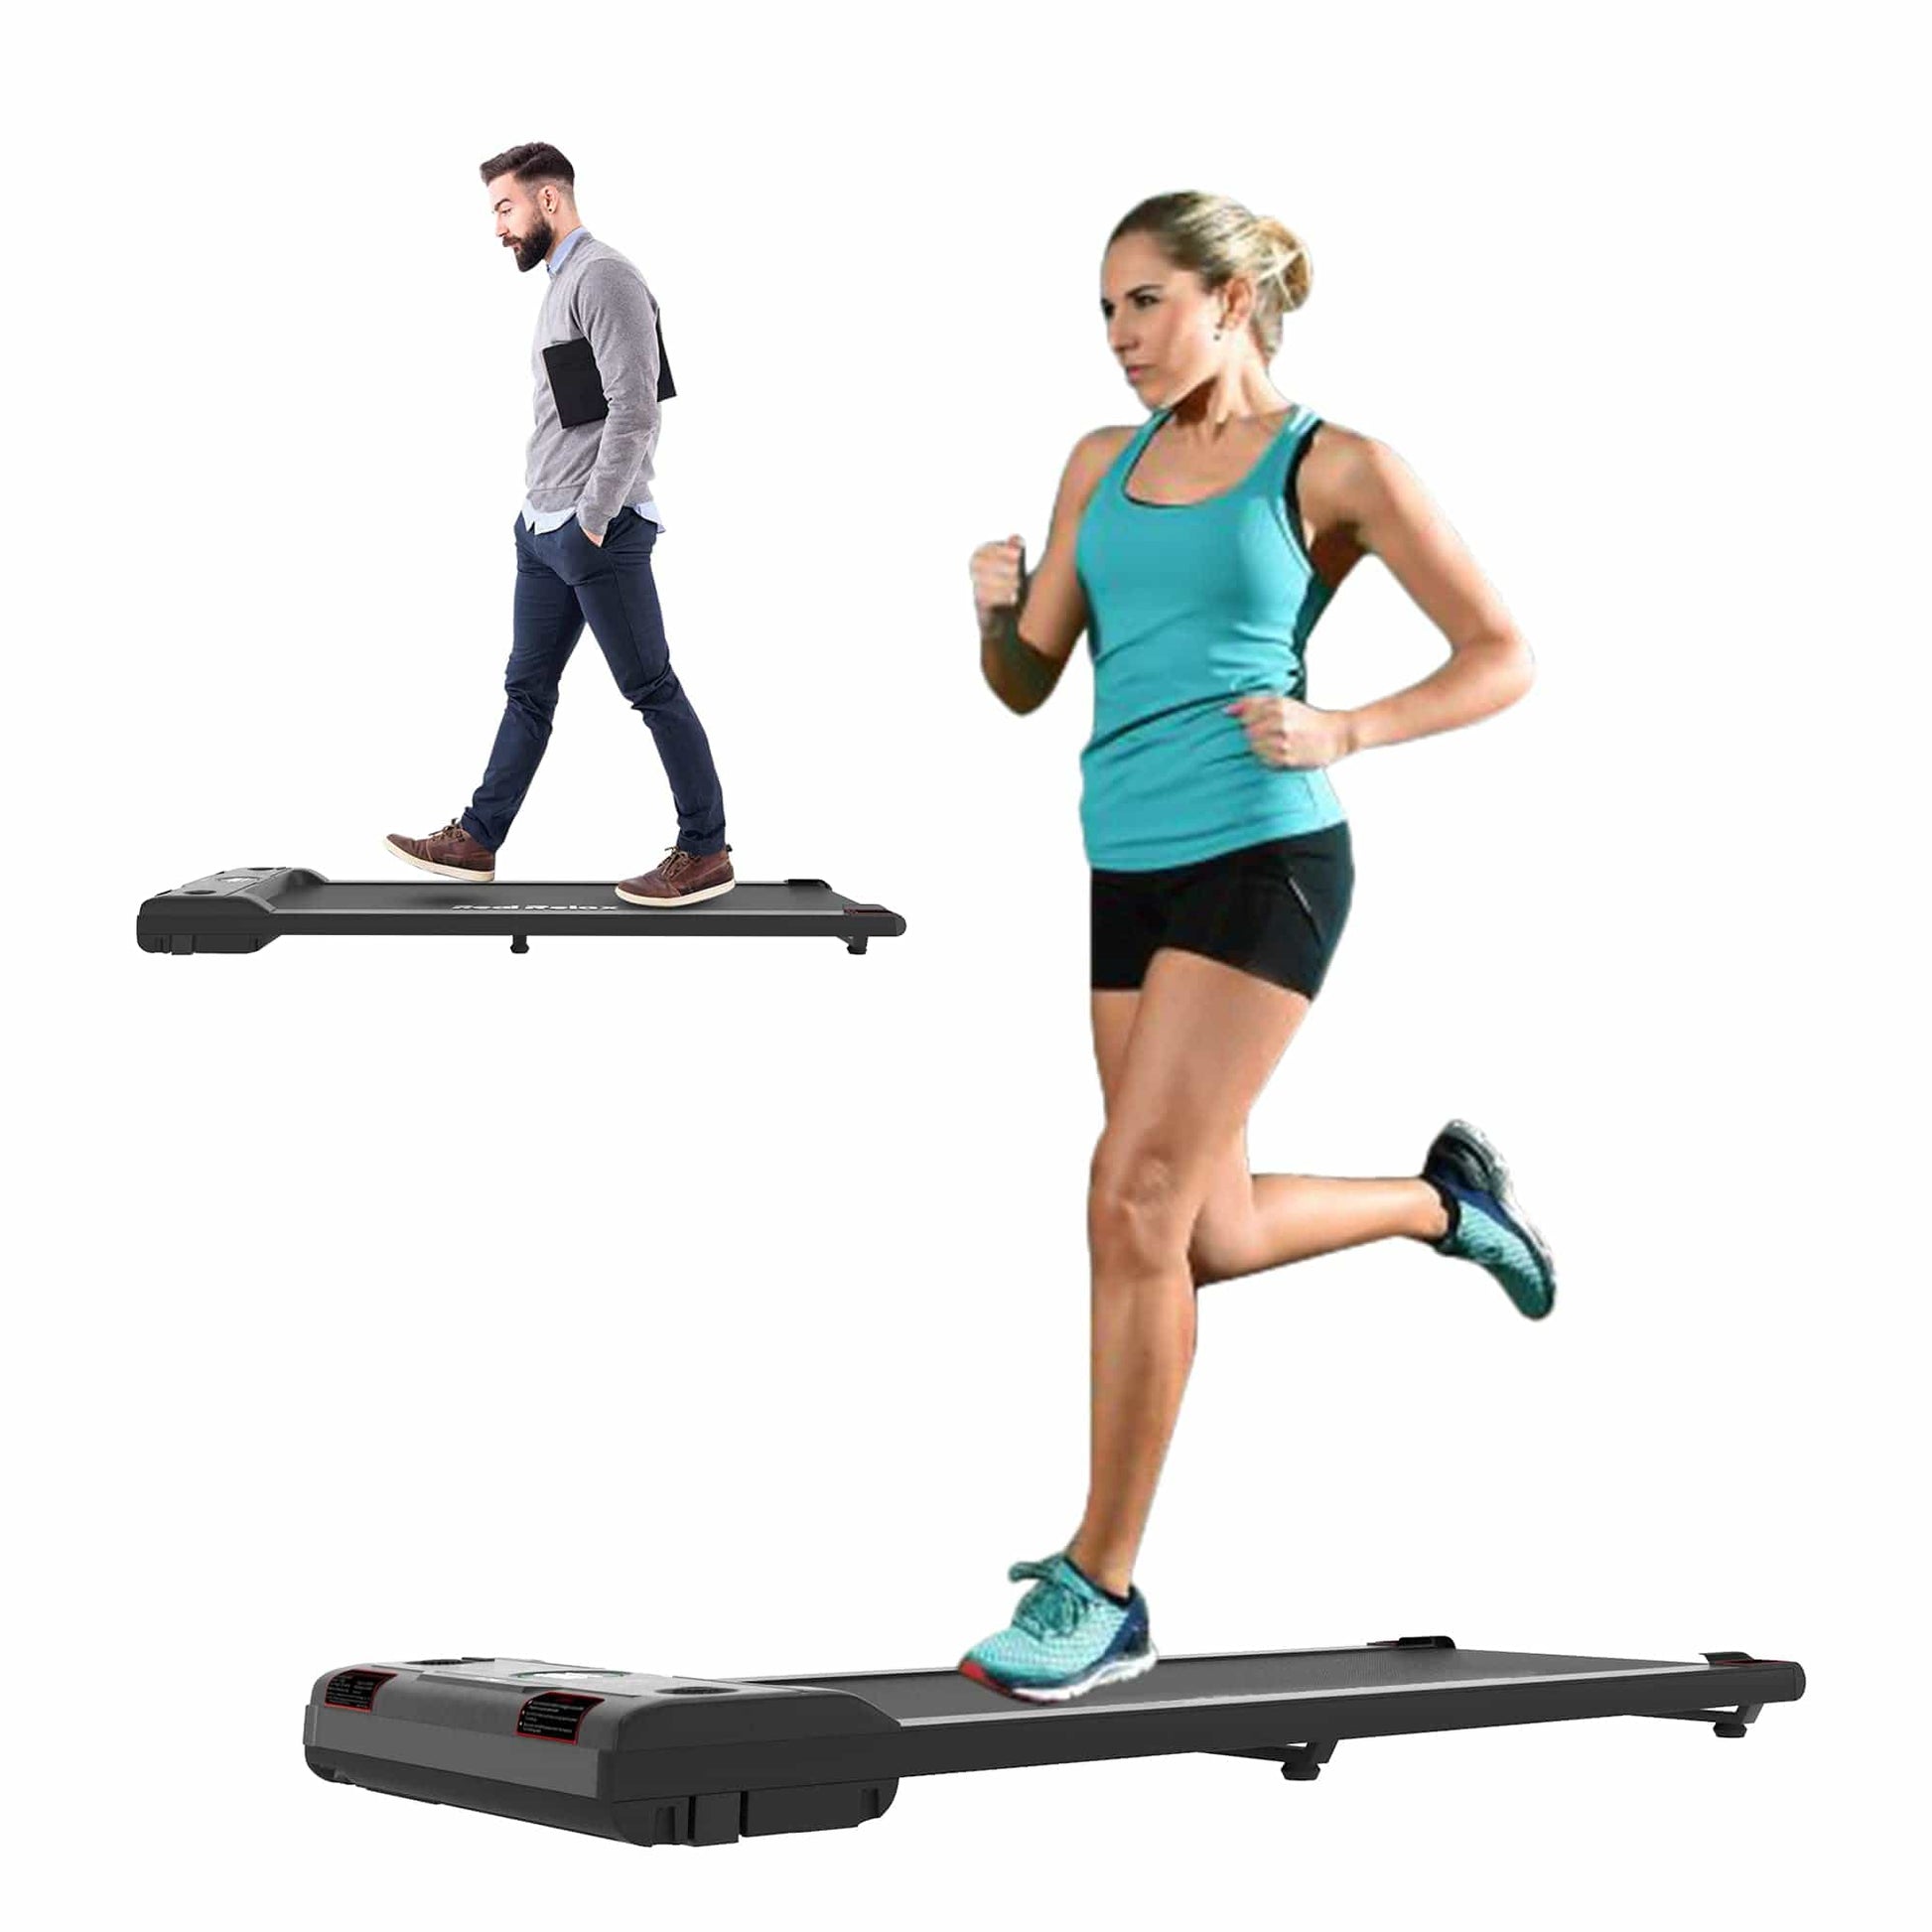 Real Relax Sports&Fitness Real Relax Under Desk Treadmill, Slim Walking Pad Space Saving Motorized Treadmill for Home Office Workout, No Installation Required